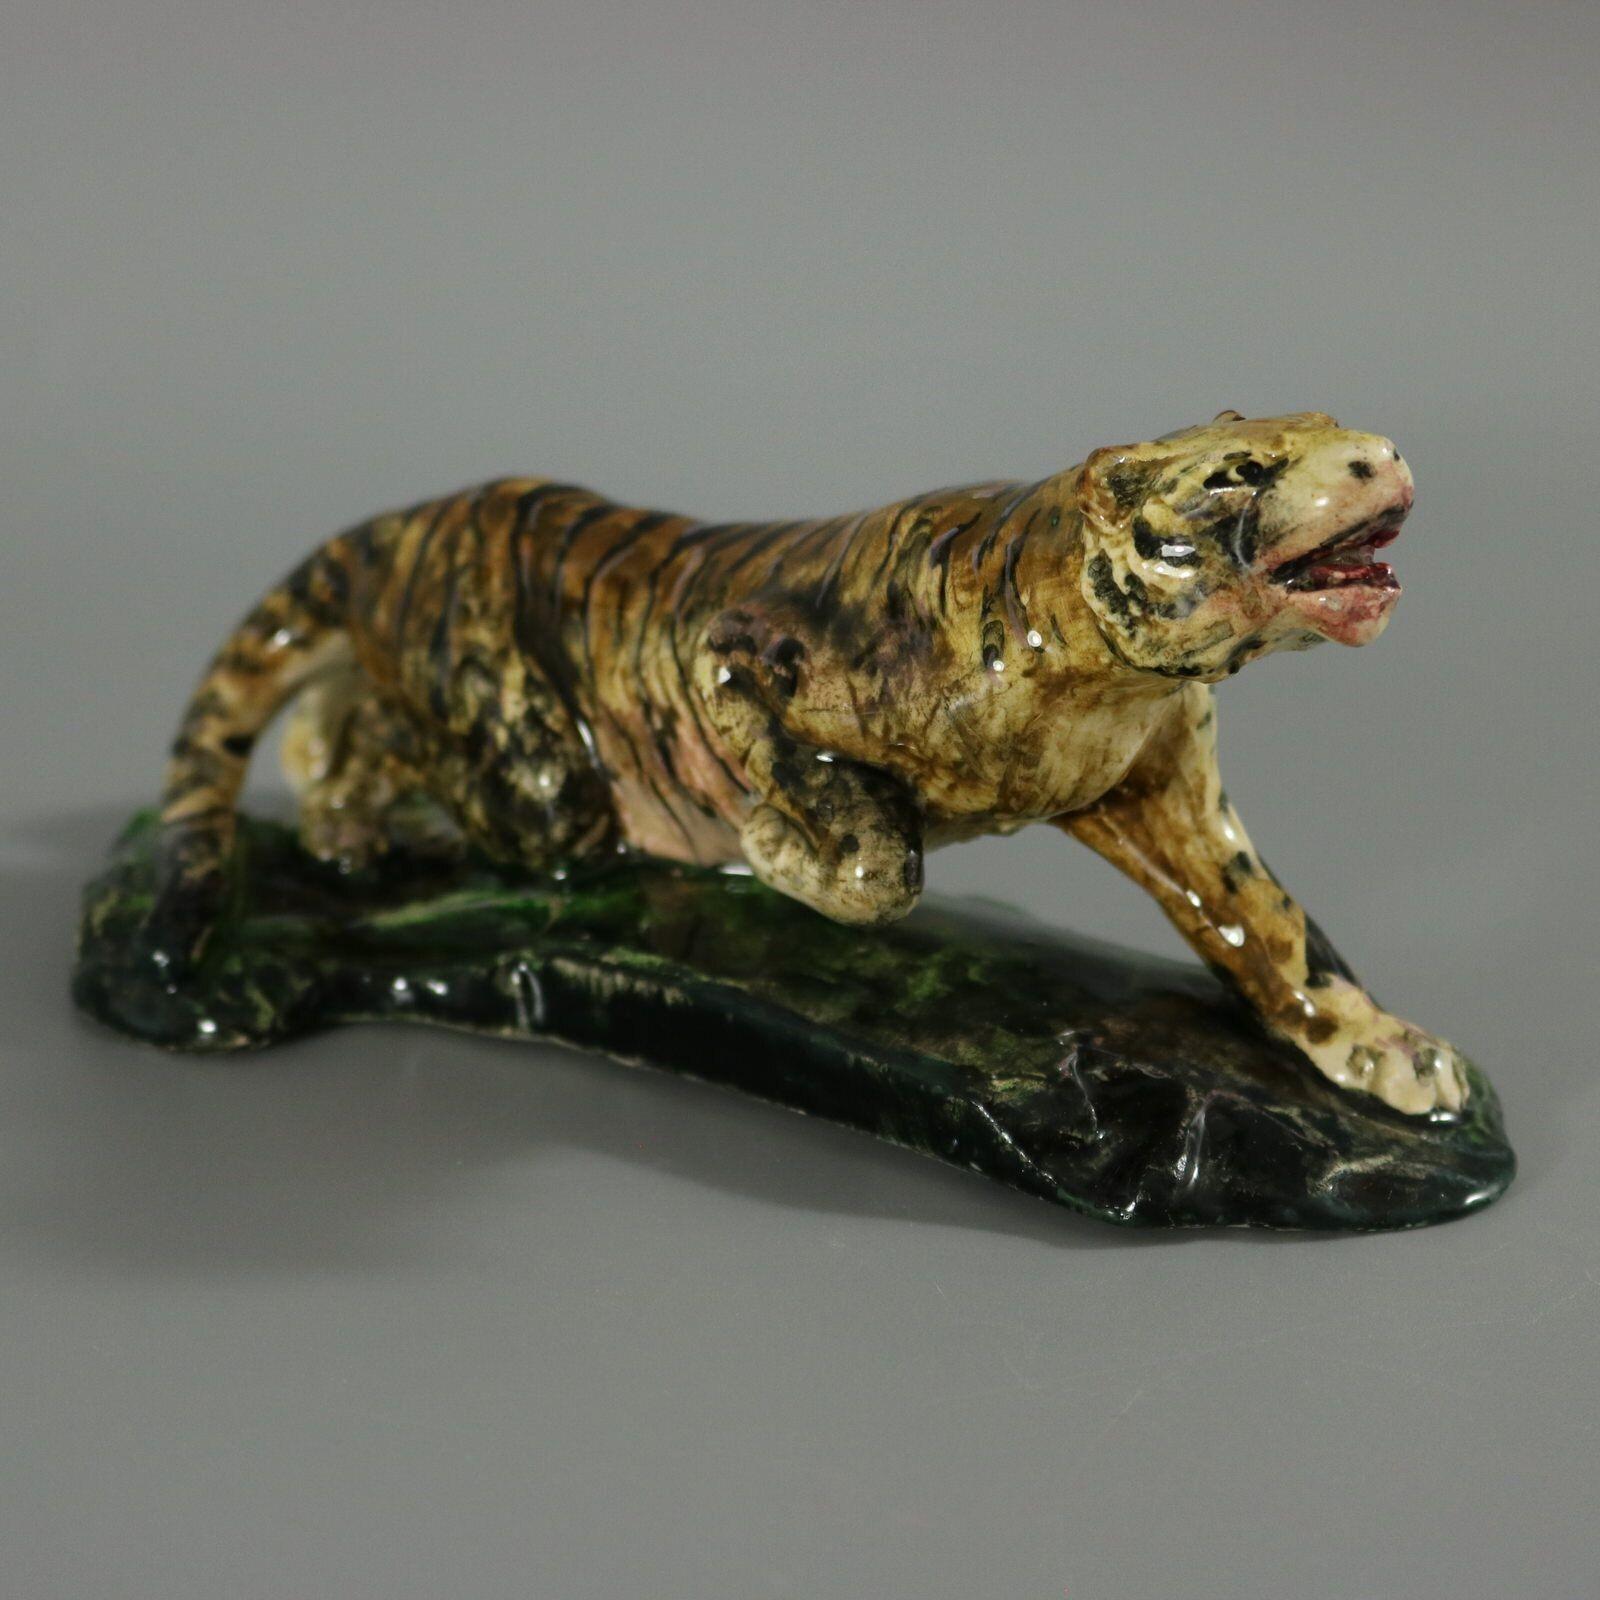 Clement Massier French Majolica figure which features a prowling tiger. Colouration: orange, brown, green, are predominant. The piece bears maker's marks for the Clement Massier pottery.